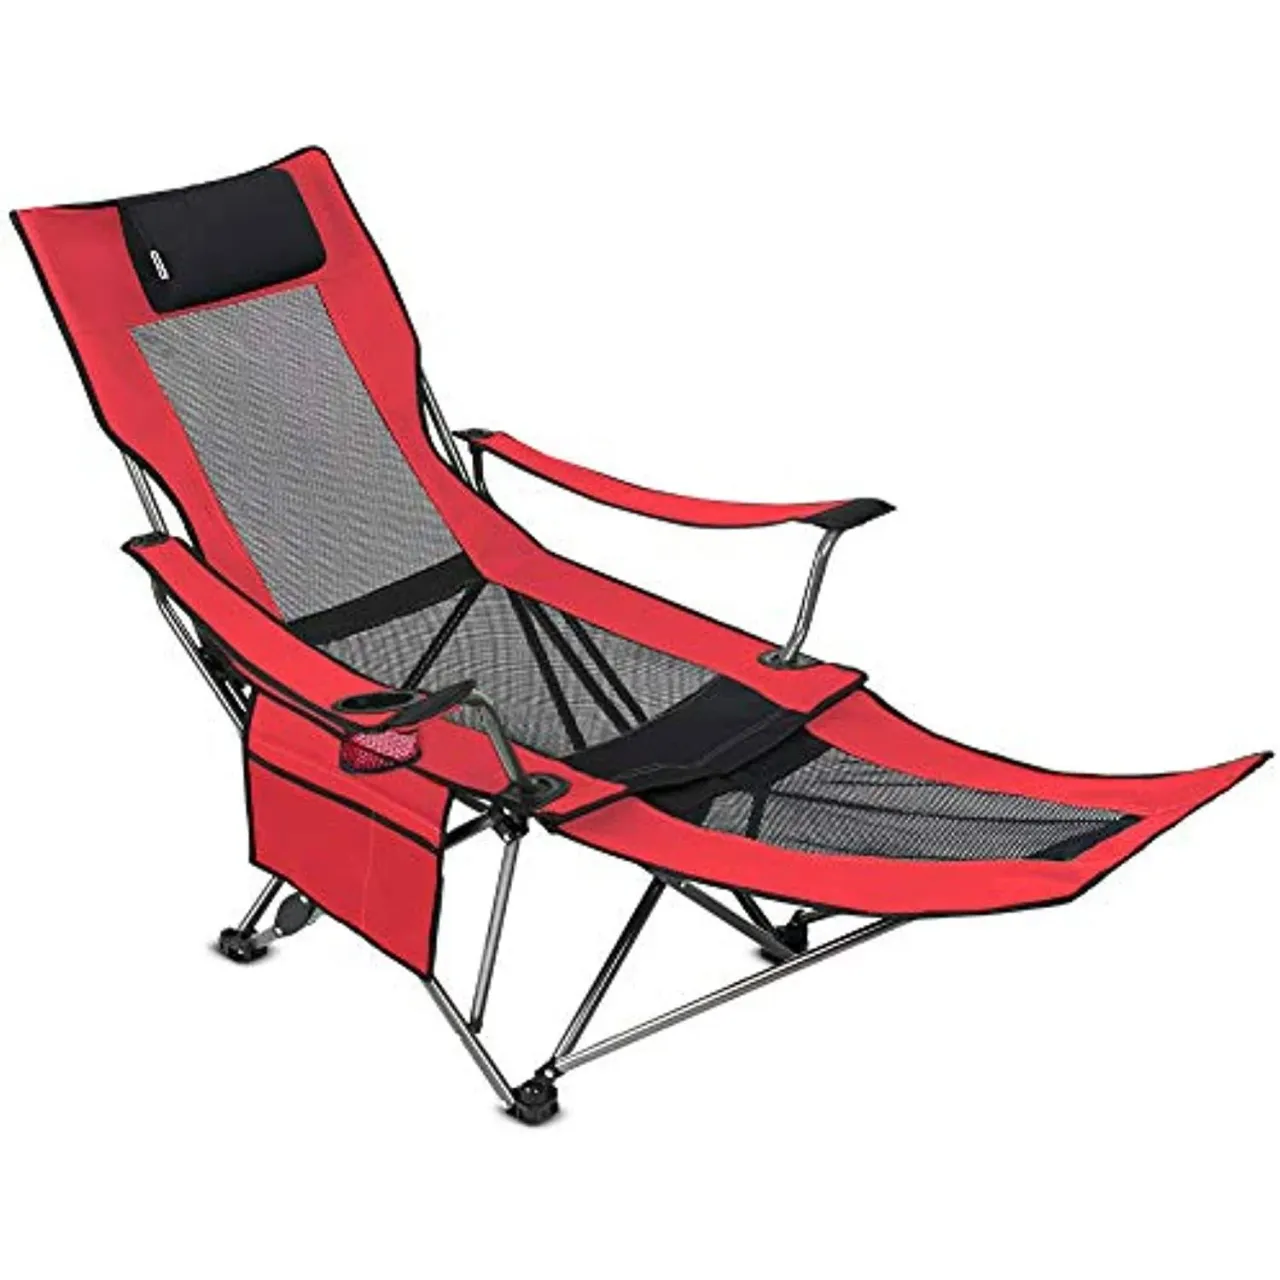 2 Outdoor Living Suntime Camping Folding Portable Mesh Chair with Removabel Footrest